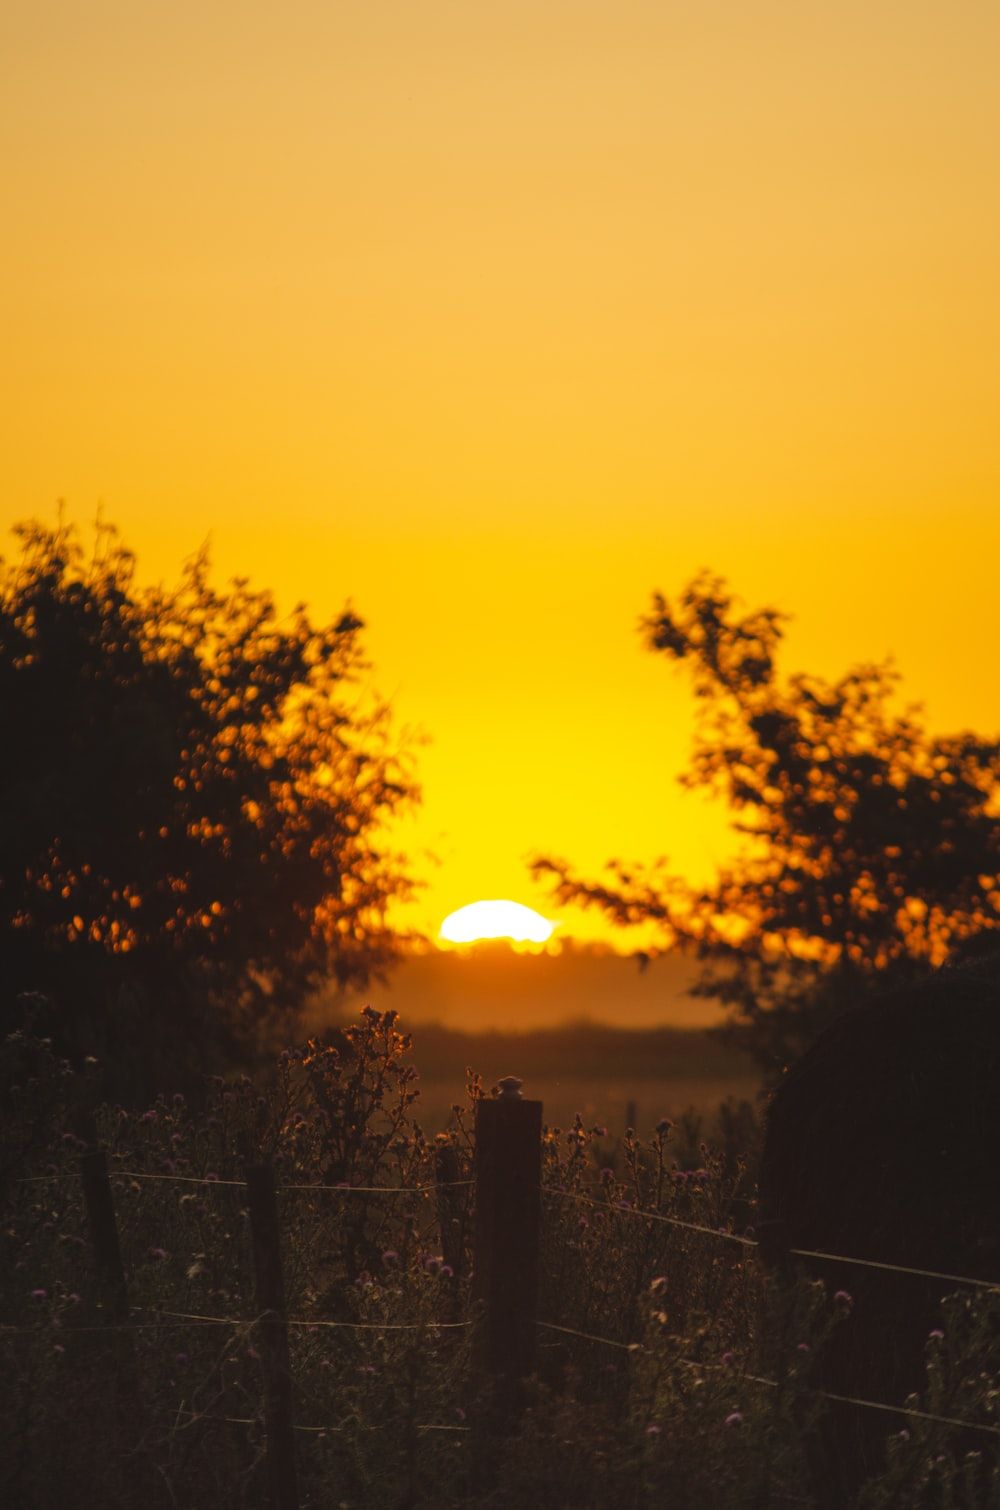 Yellow Sunrise Picture. Download Free Image